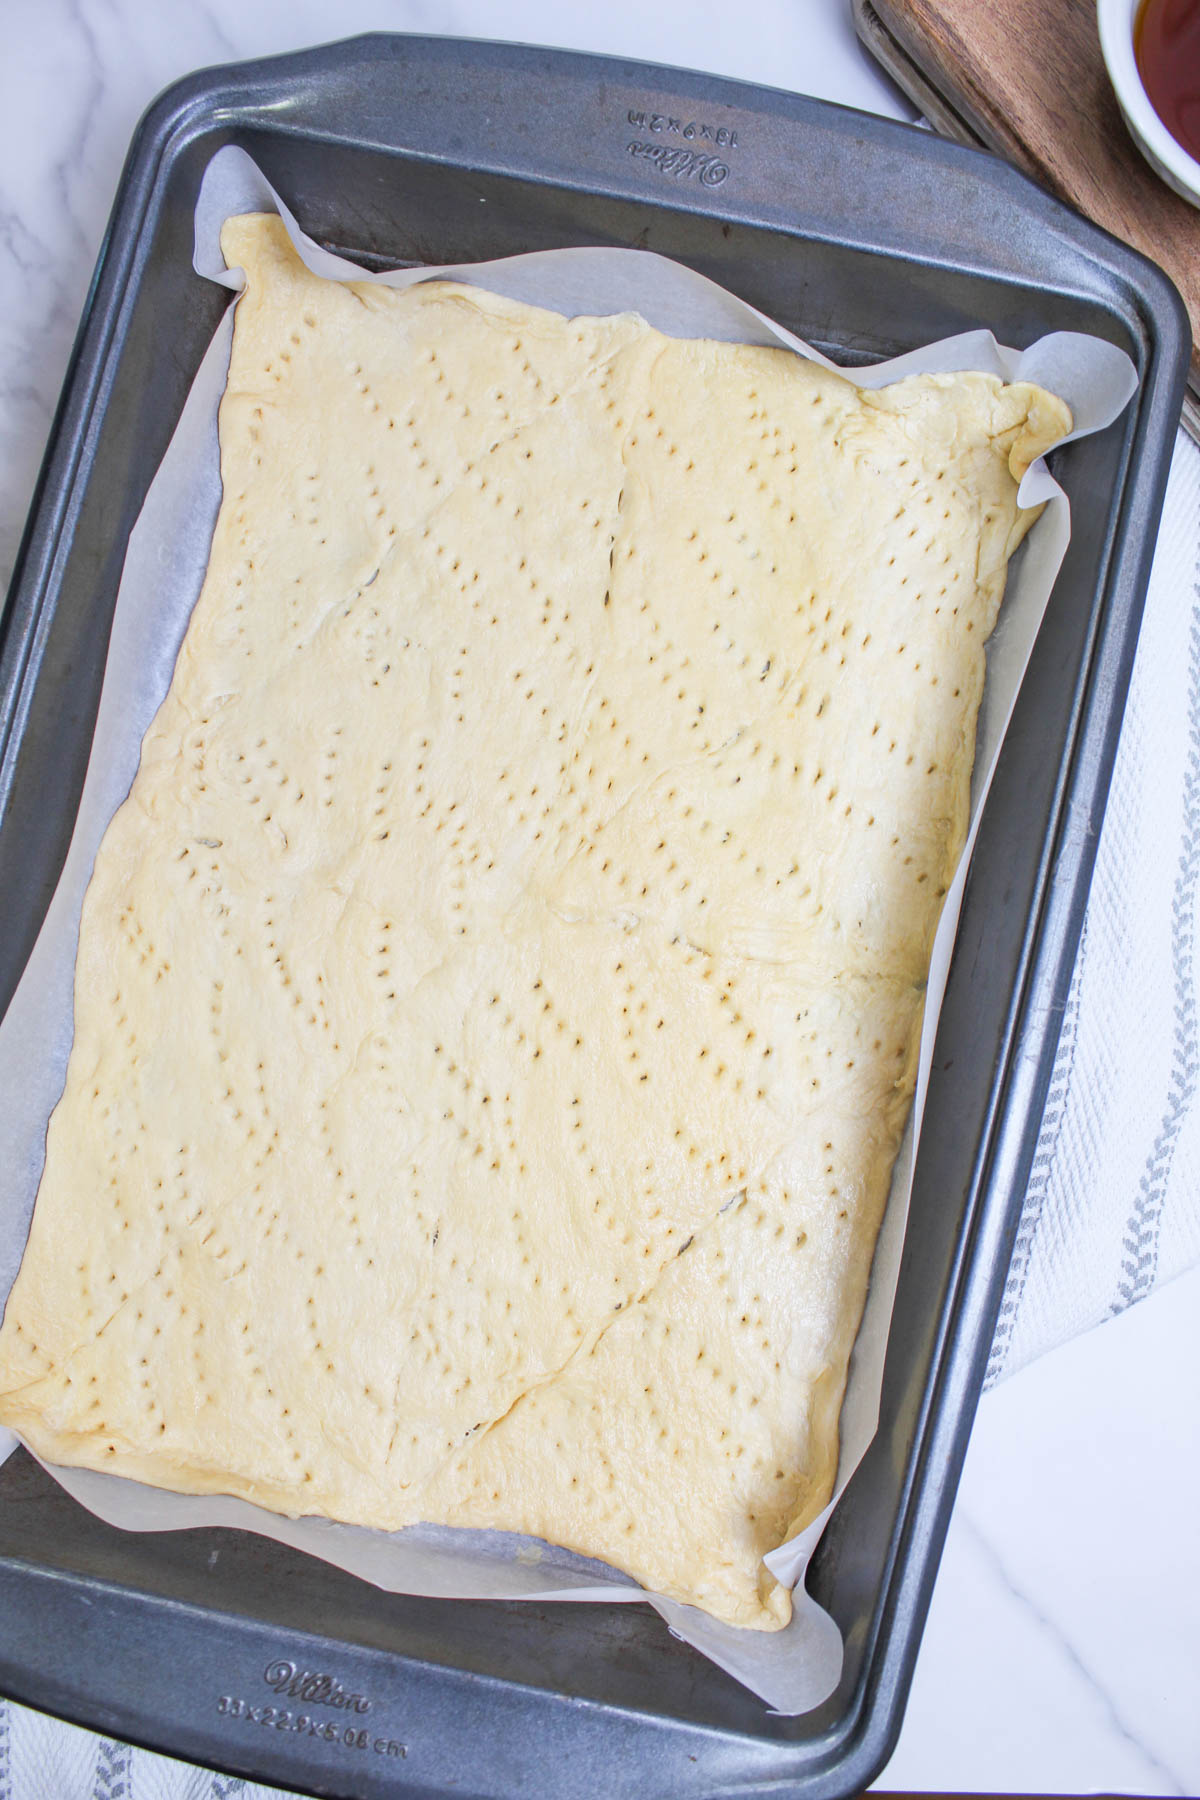 A sheet of pastry dough on a baking pan.